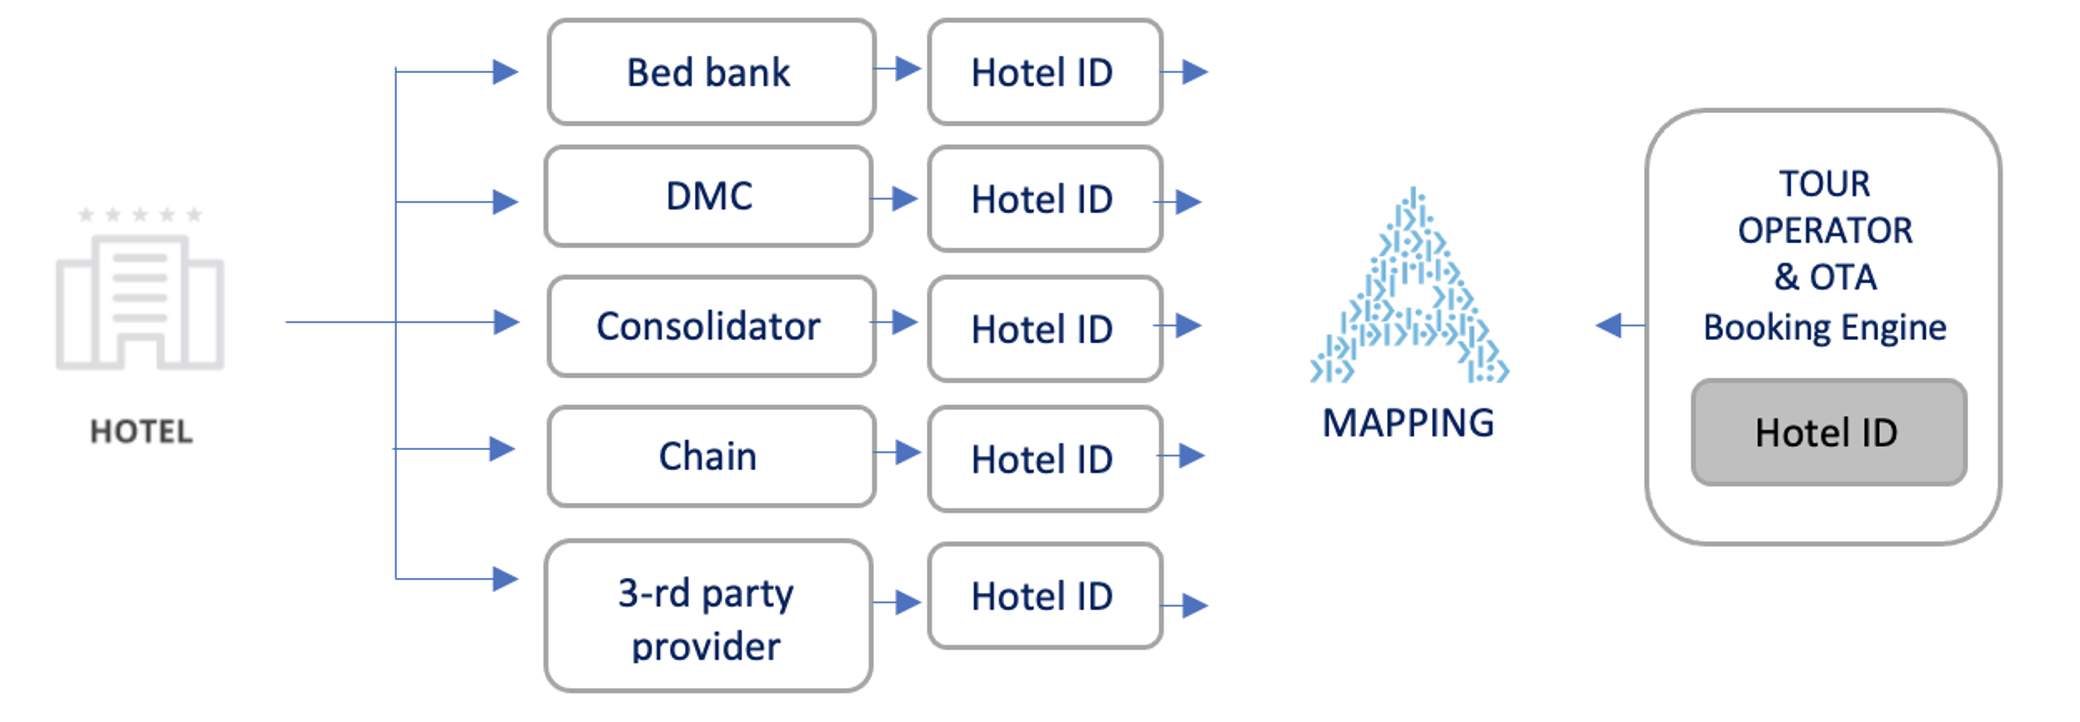 hotel mapping diagram